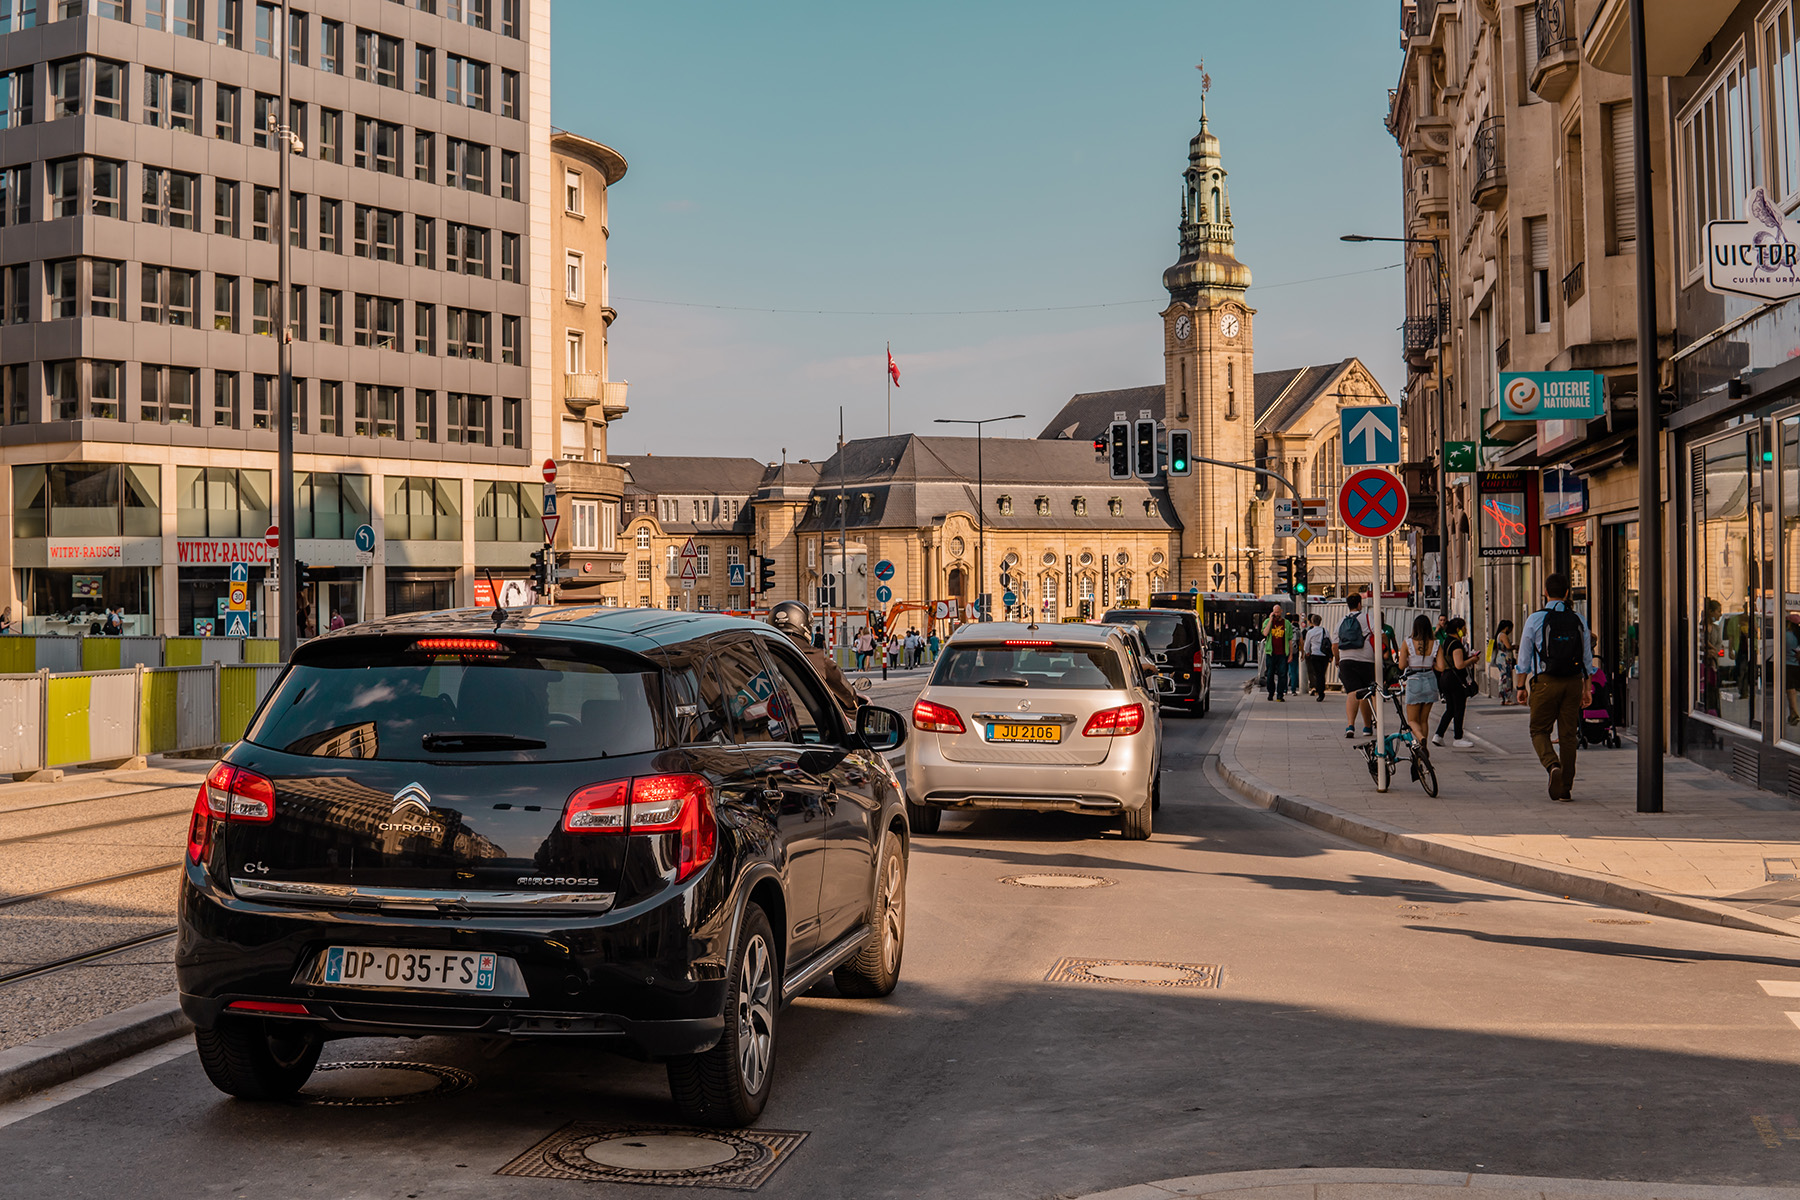 Traffic in Luxembourg City